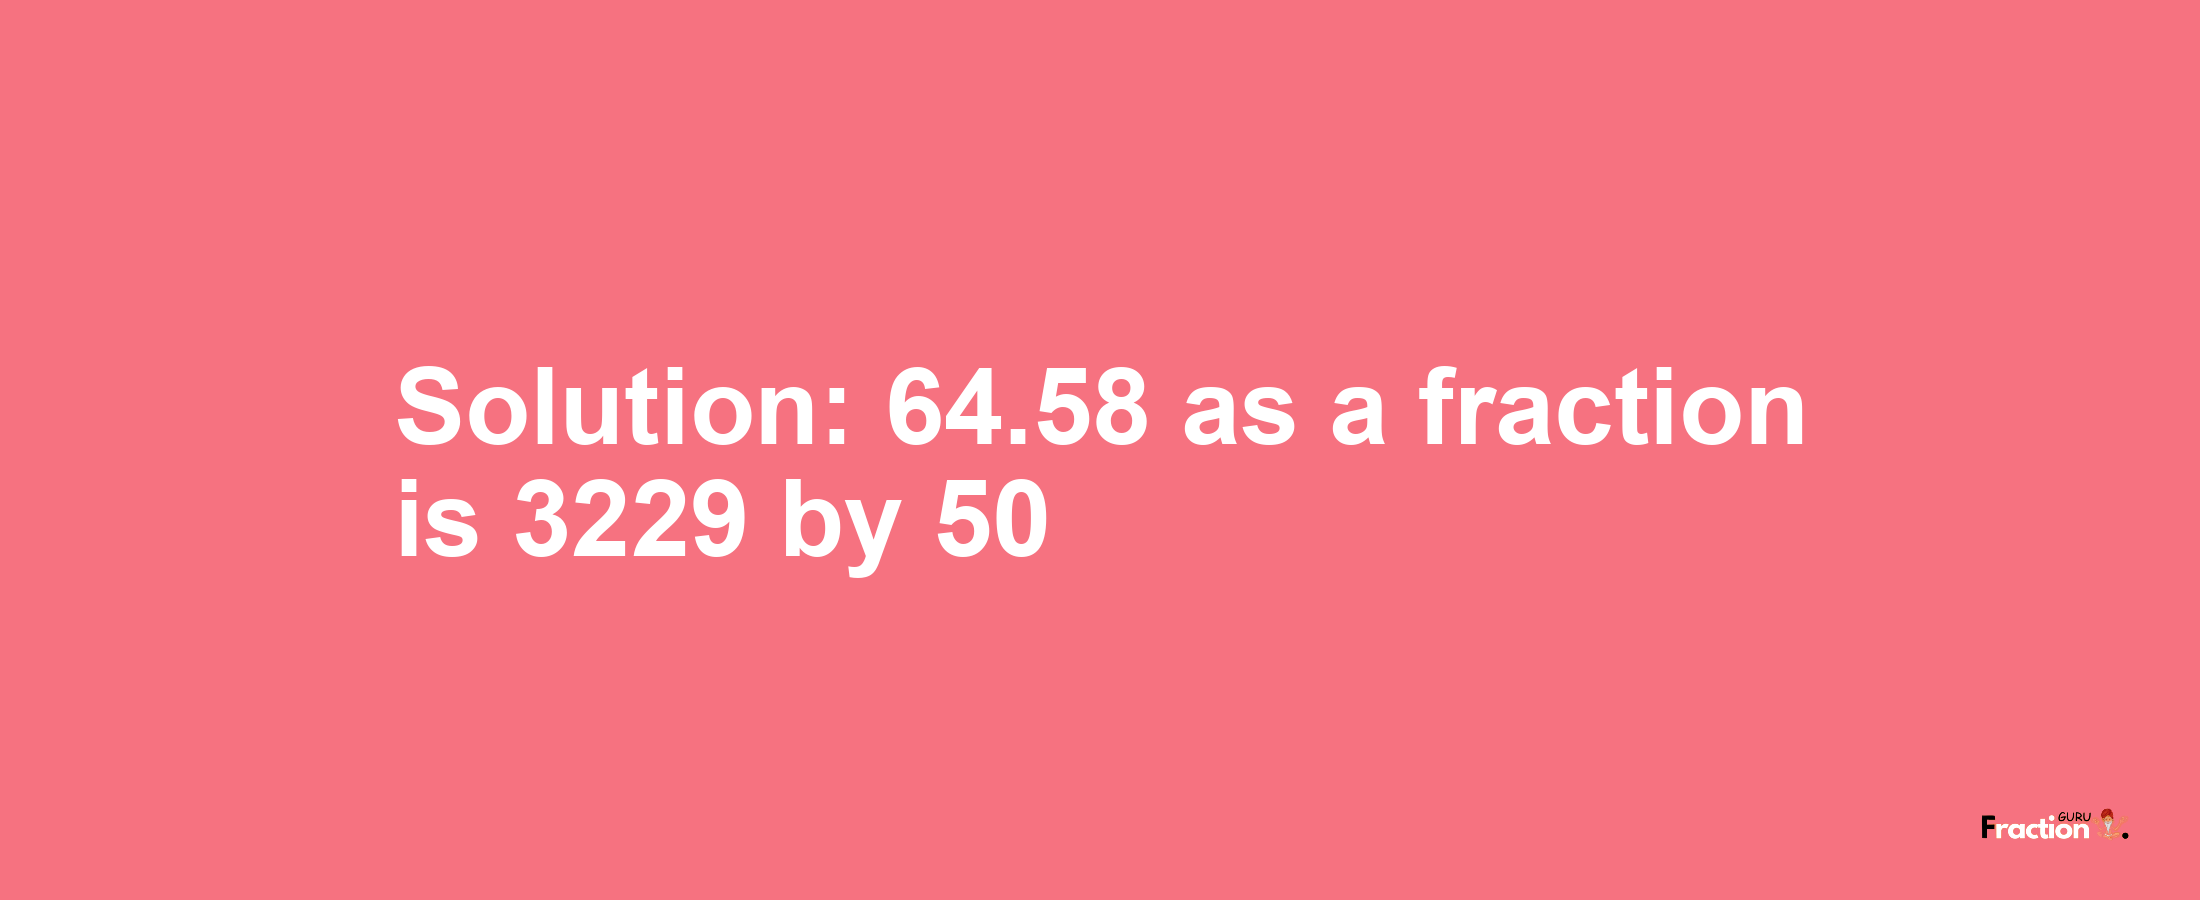 Solution:64.58 as a fraction is 3229/50